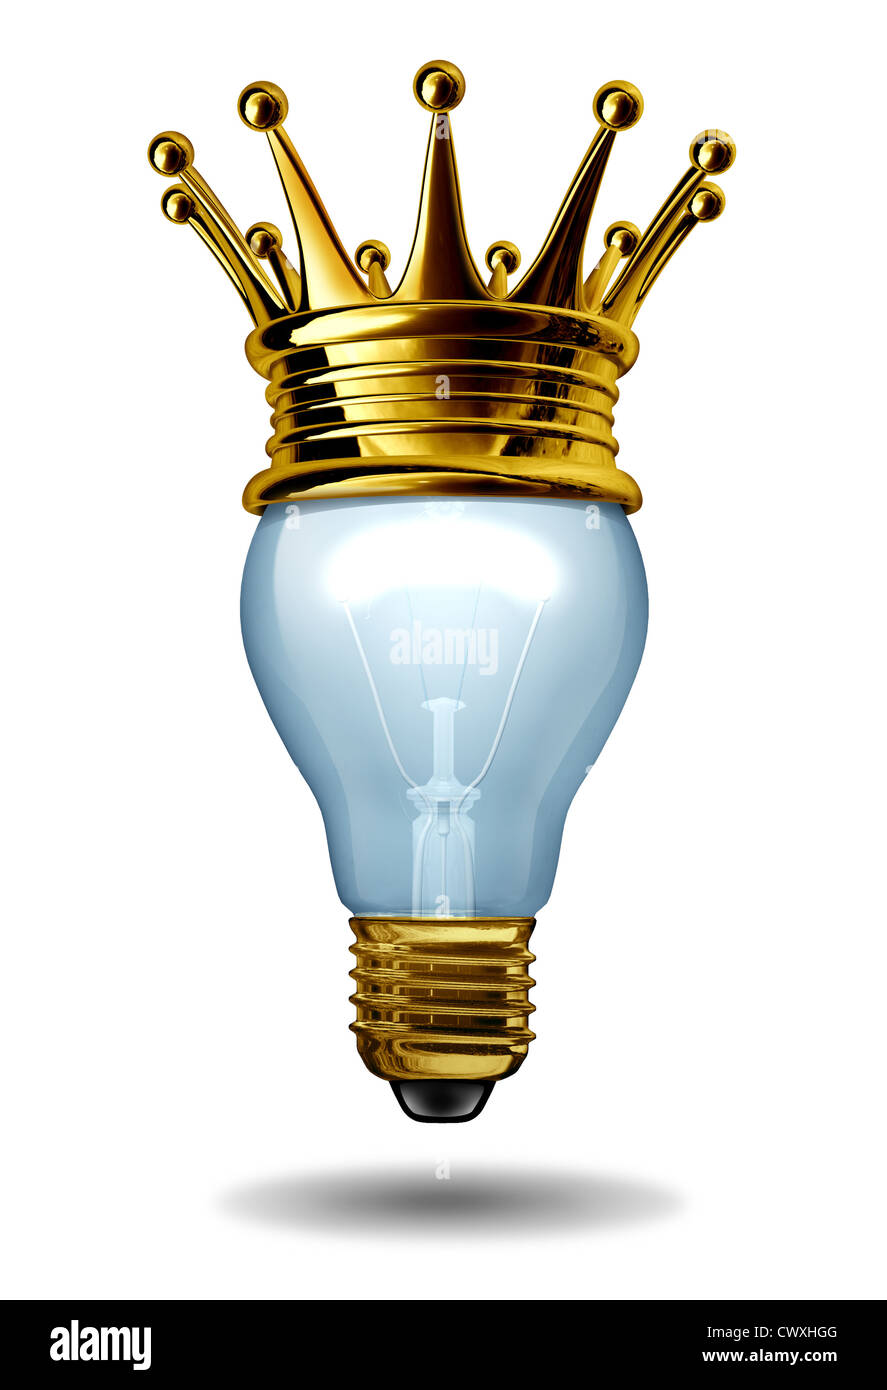 Best ideas concept with a light bulb and a gold crown as an icon of winning  creativity and innovation from an inventing mind and design thinking as a  strategic company philosophy for